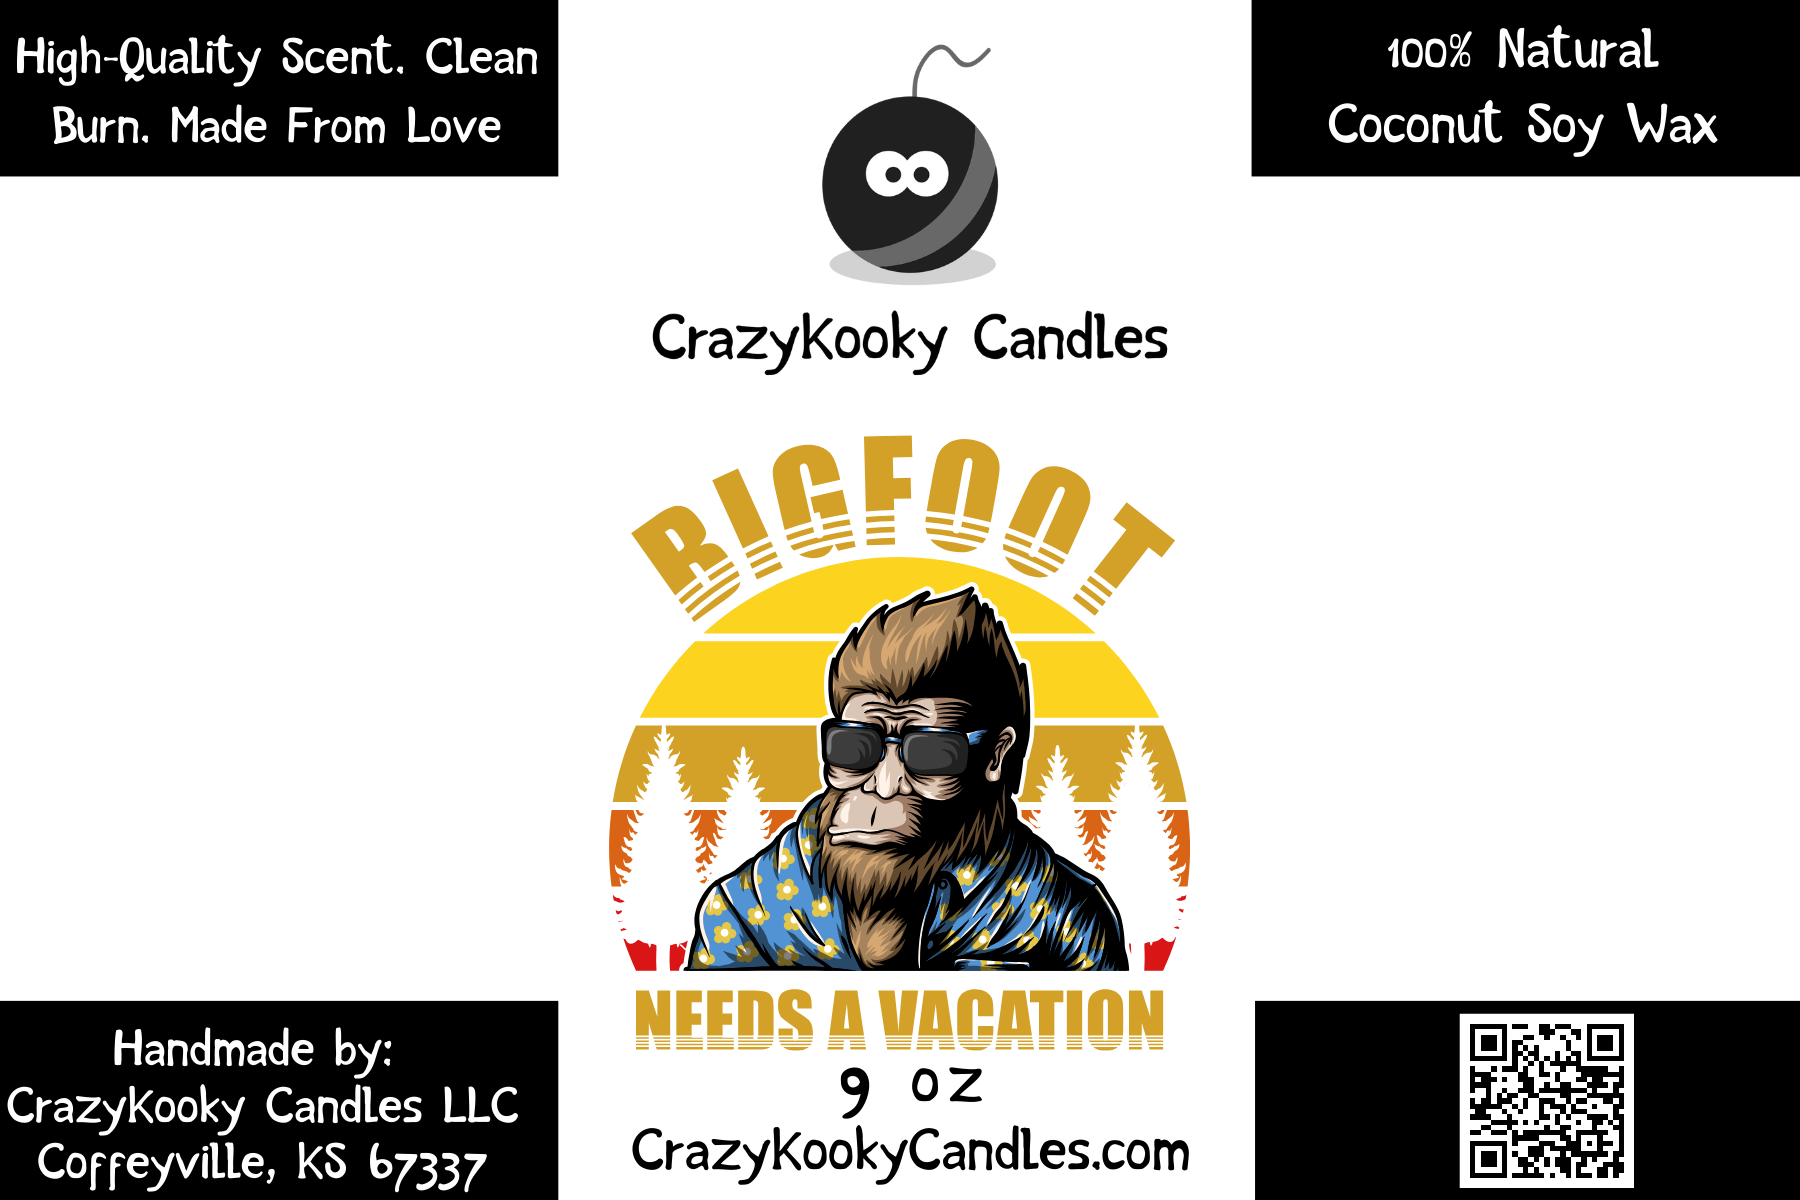 BIGFOOT NEEDS A VACATION - Funny Candle, Scented Coconut Soy Candle, 9oz - CrazyKooky Candles LLC